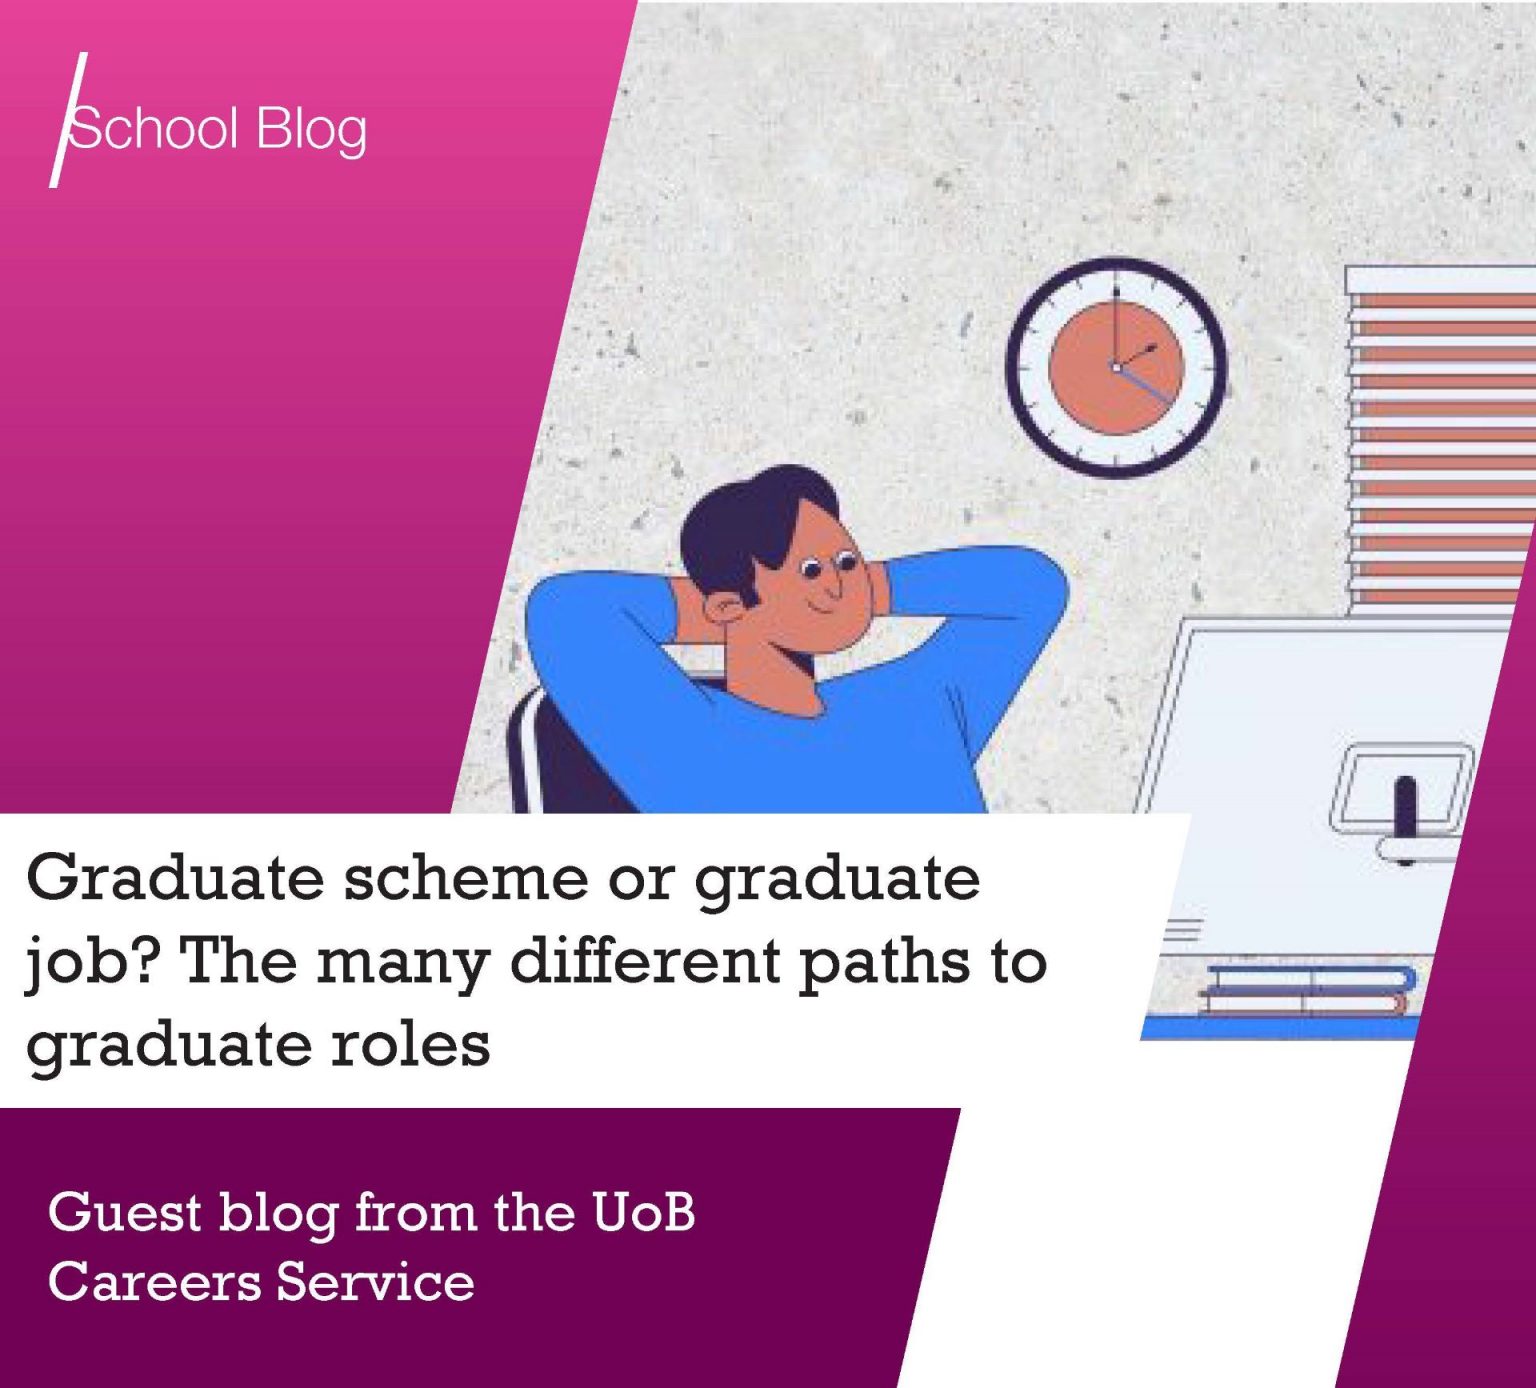 Graduate scheme or graduate job? The many different paths to graduate